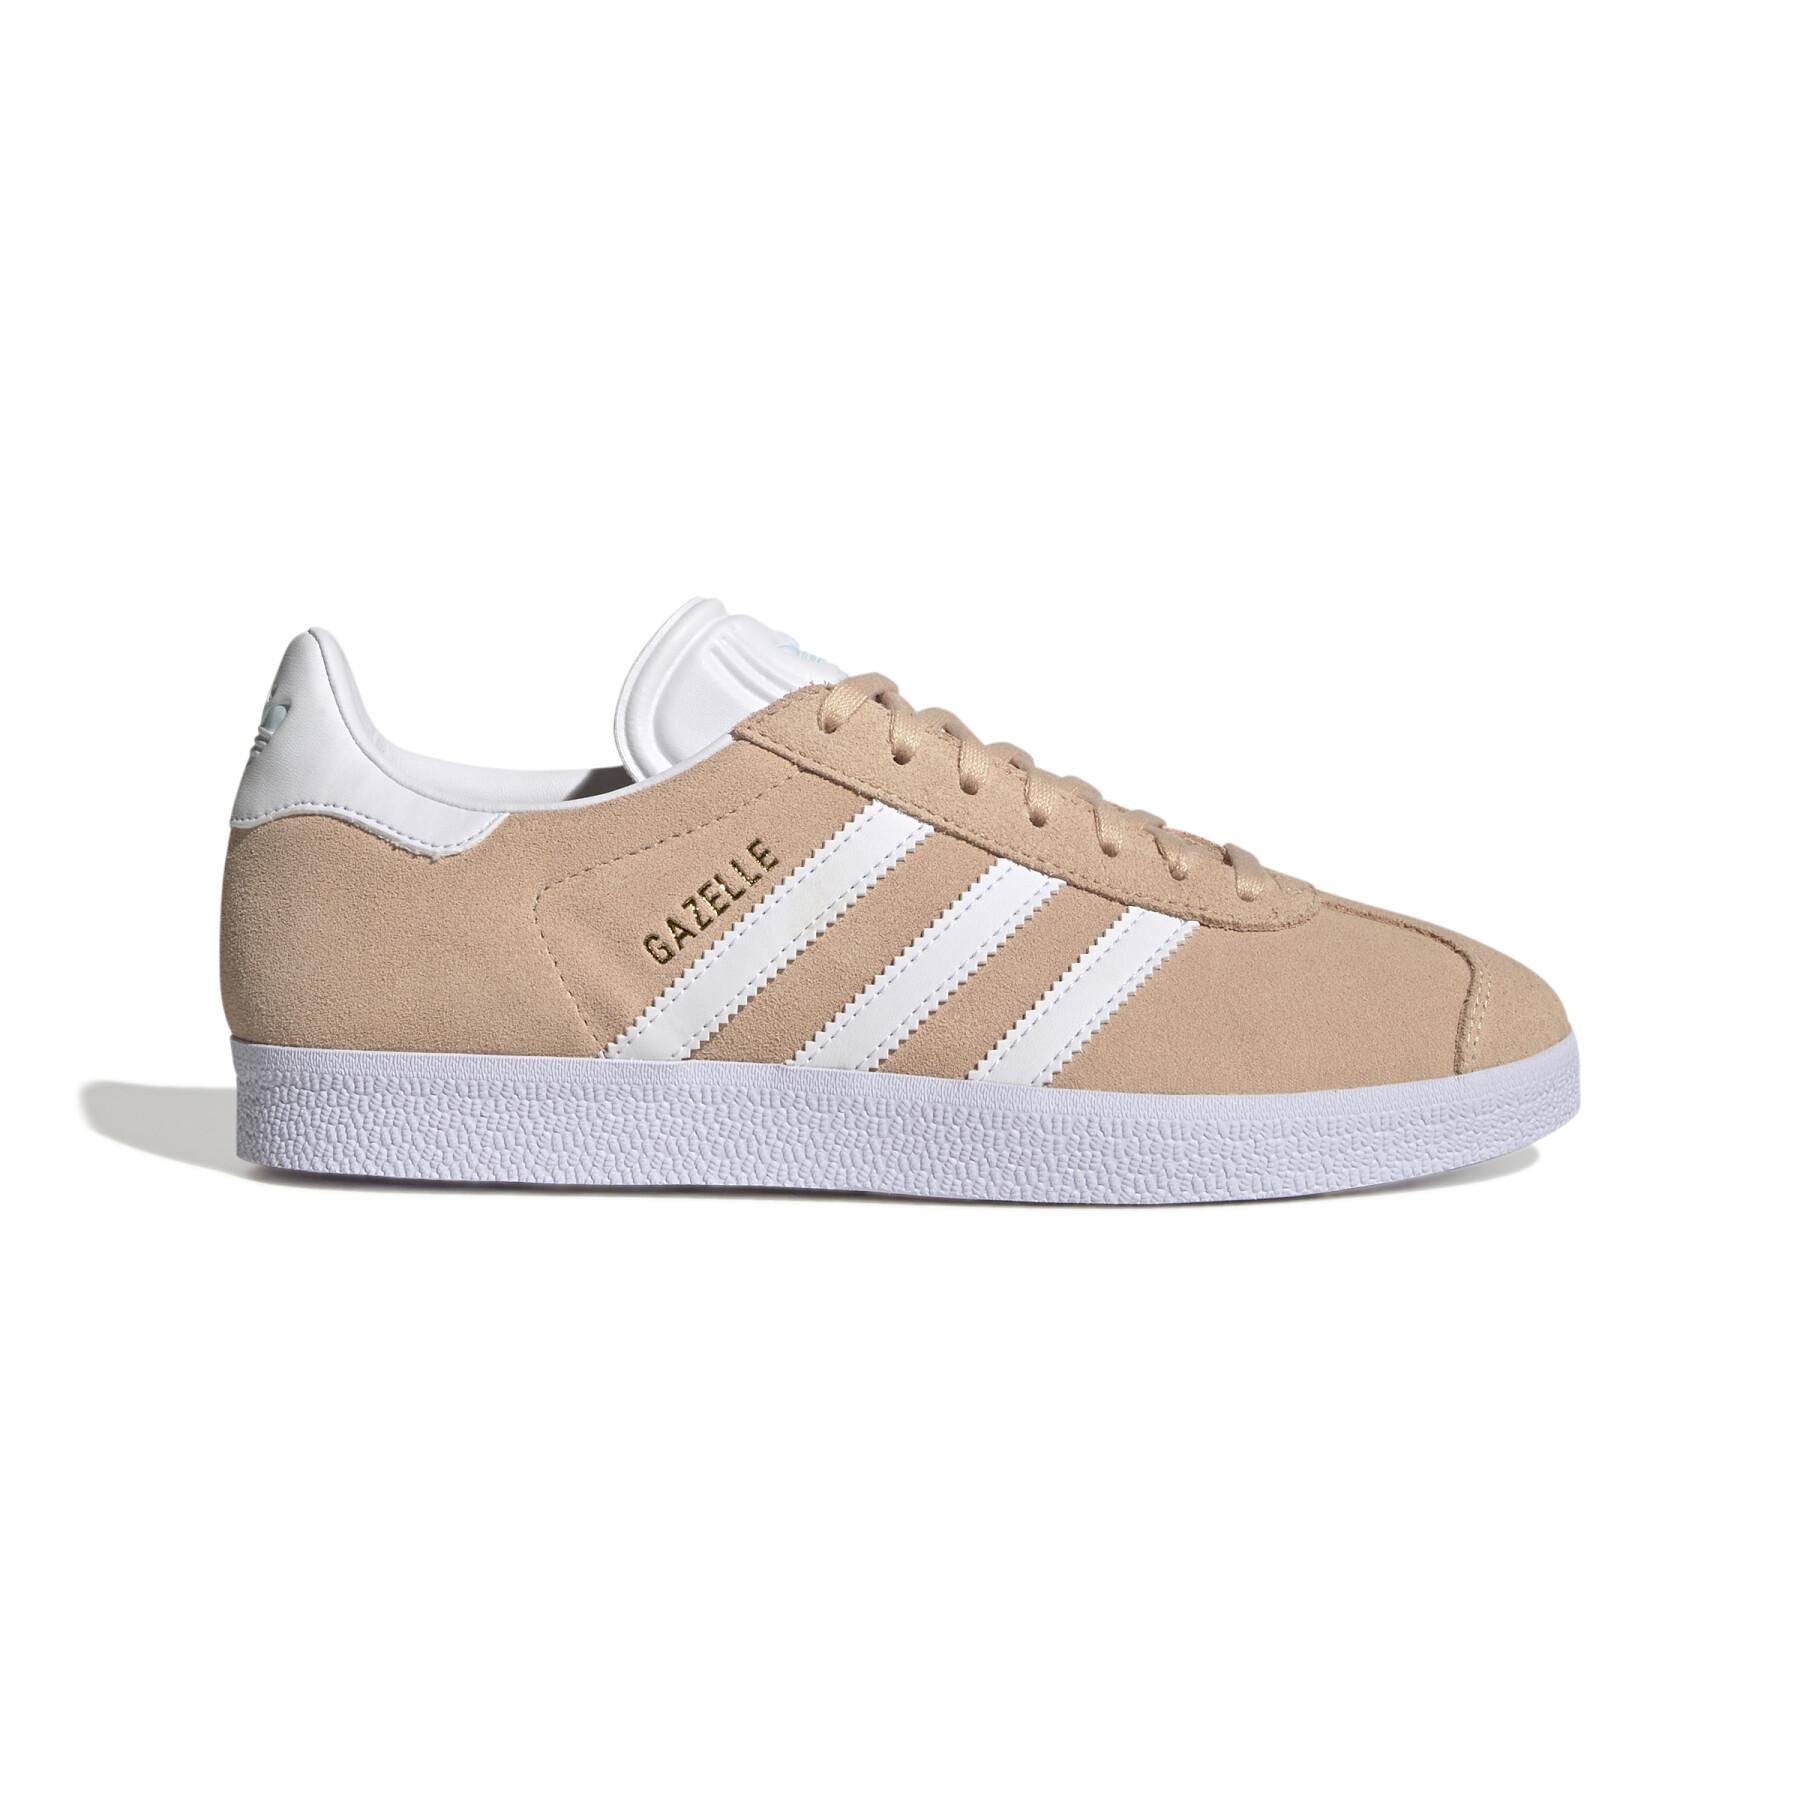 https://media.sneakin.fr/catalog/product/cache/image/1800x/9df78eab33525d08d6e5fb8d27136e95/a/d/adidas-originals_gz1961_1_footwear_photography_side_lateral_center_view_white_000.jpg